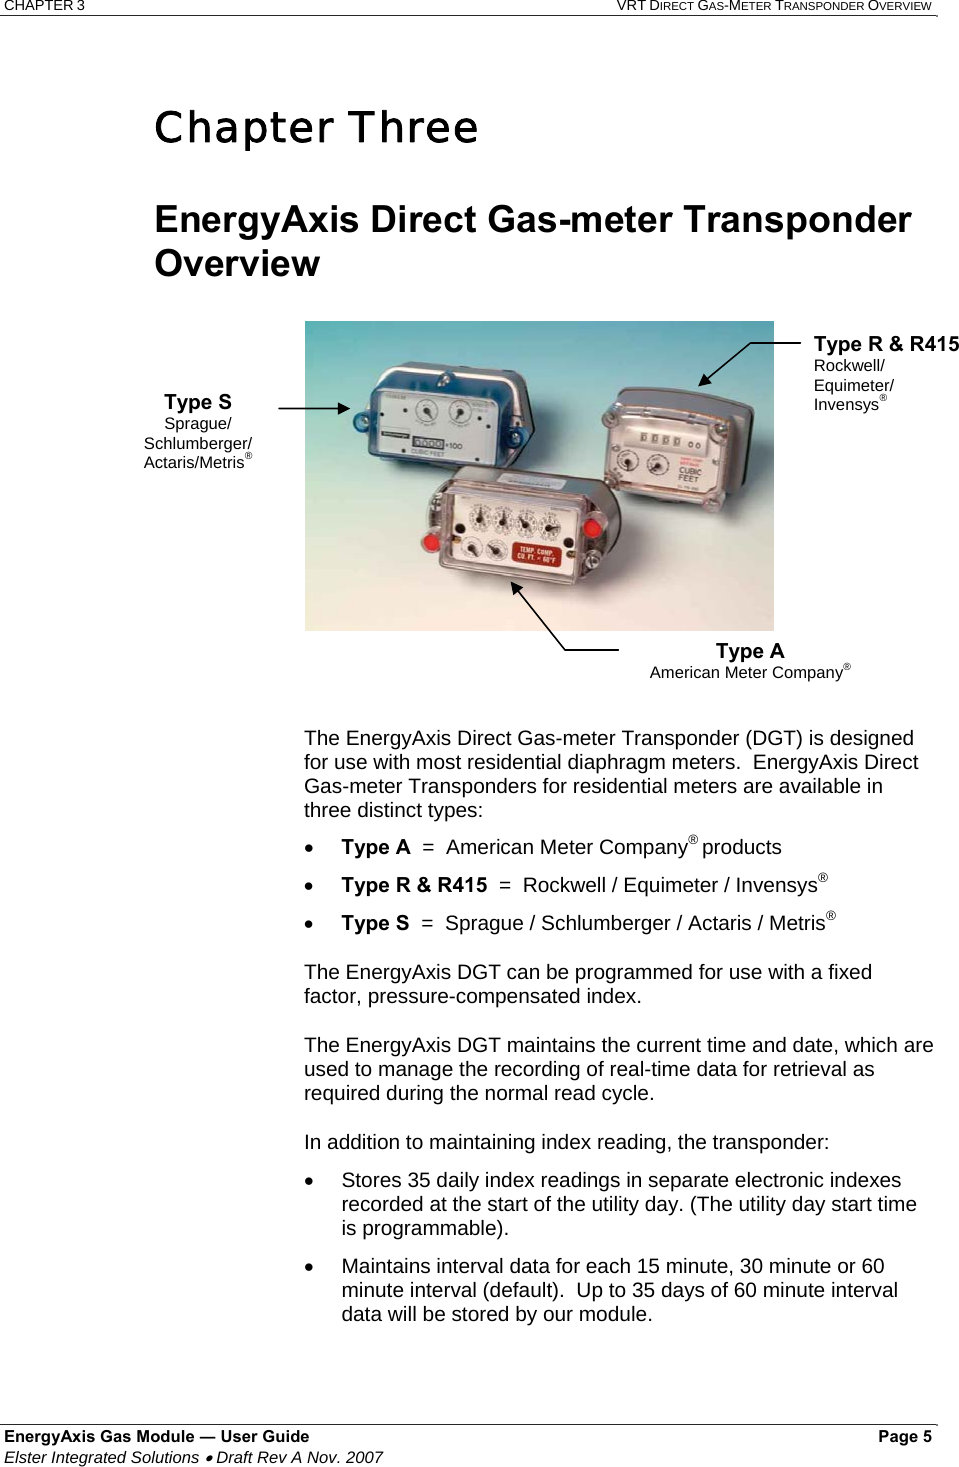 CHAPTER 3  VRT DIRECT GAS-METER TRANSPONDER OVERVIEW EnergyAxis Gas Module ― User Guide   Page 5  Elster Integrated Solutions • Draft Rev A Nov. 2007   Chapter Three  EnergyAxis Direct Gas-meter Transponder Overview The EnergyAxis Direct Gas-meter Transponder (DGT) is designed for use with most residential diaphragm meters.  EnergyAxis Direct Gas-meter Transponders for residential meters are available in three distinct types:  • Type A  =  American Meter Company® products • Type R &amp; R415  =  Rockwell / Equimeter / Invensys® • Type S  =  Sprague / Schlumberger / Actaris / Metris® The EnergyAxis DGT can be programmed for use with a fixed factor, pressure-compensated index.  The EnergyAxis DGT maintains the current time and date, which are used to manage the recording of real-time data for retrieval as required during the normal read cycle.   In addition to maintaining index reading, the transponder: •  Stores 35 daily index readings in separate electronic indexes recorded at the start of the utility day. (The utility day start time is programmable). •  Maintains interval data for each 15 minute, 30 minute or 60 minute interval (default).  Up to 35 days of 60 minute interval data will be stored by our module.  Type S Sprague/ Schlumberger/  Actaris/Metris® Type R &amp; R415 Rockwell/ Equimeter/ Invensys® Type A American Meter Company® 